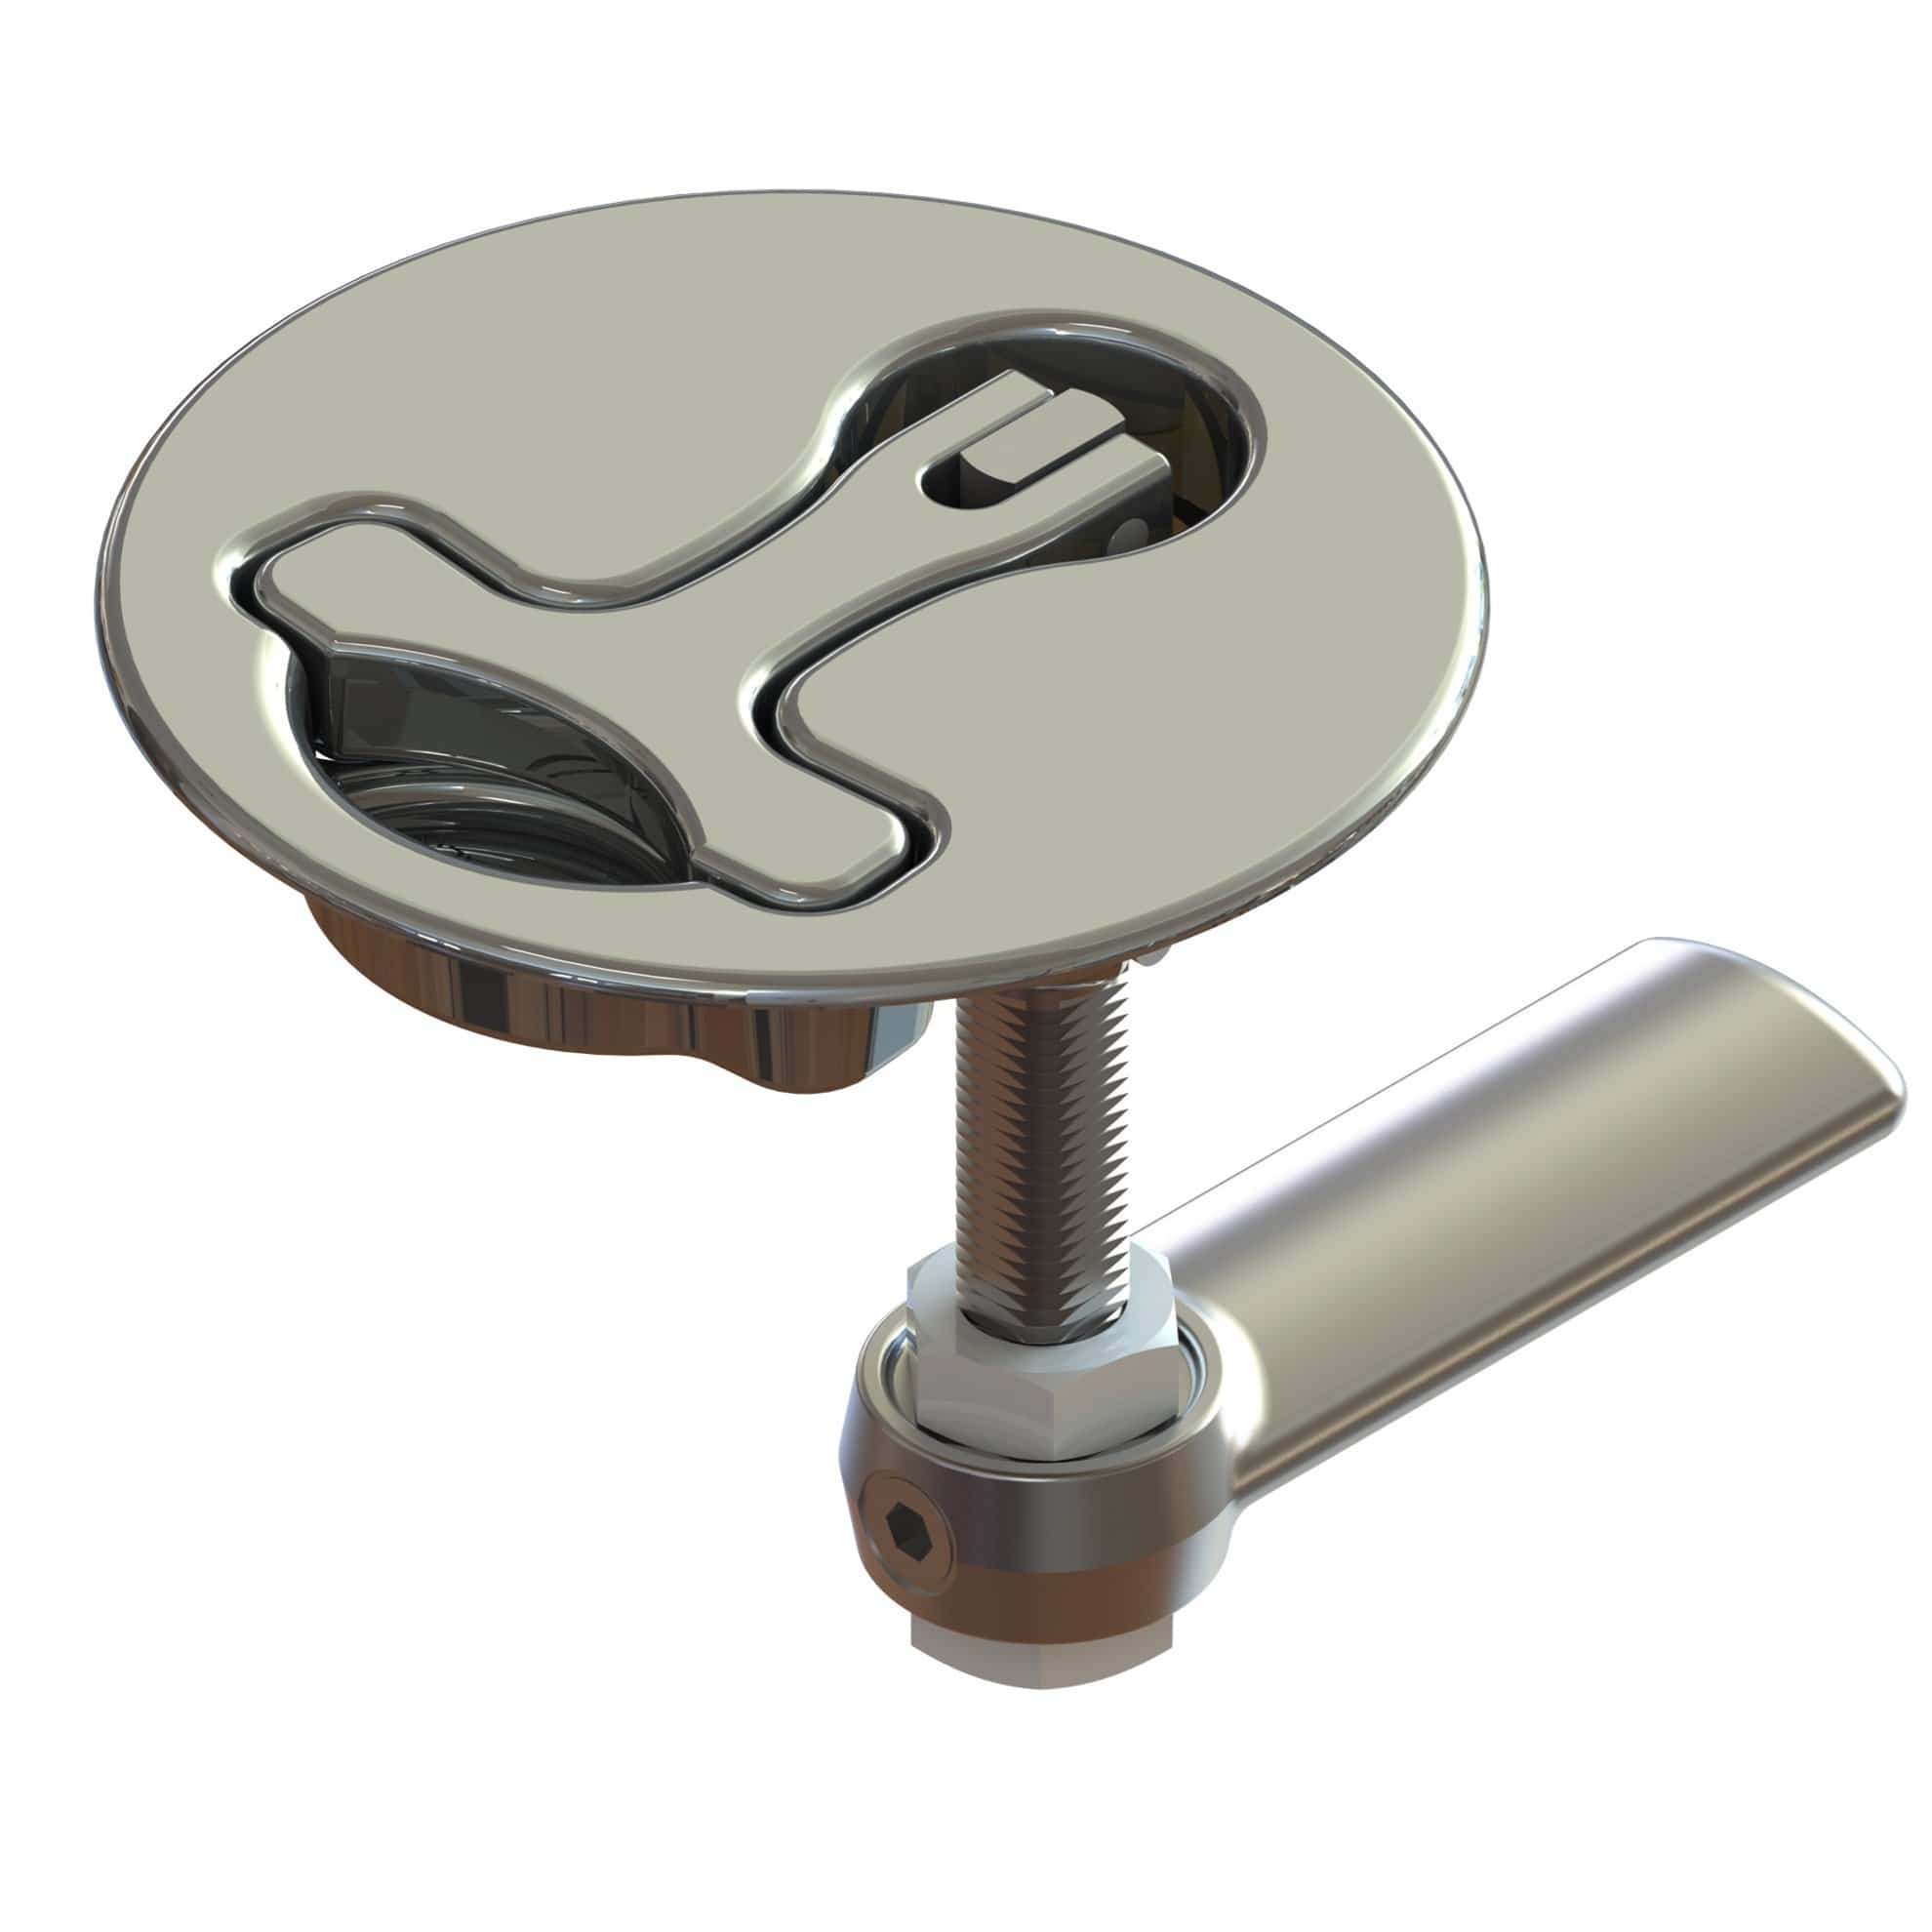 Taco Marine F16-3000 Stainless Steel Latch-Tite, Round 3" Diameter, Concealed Fasteners